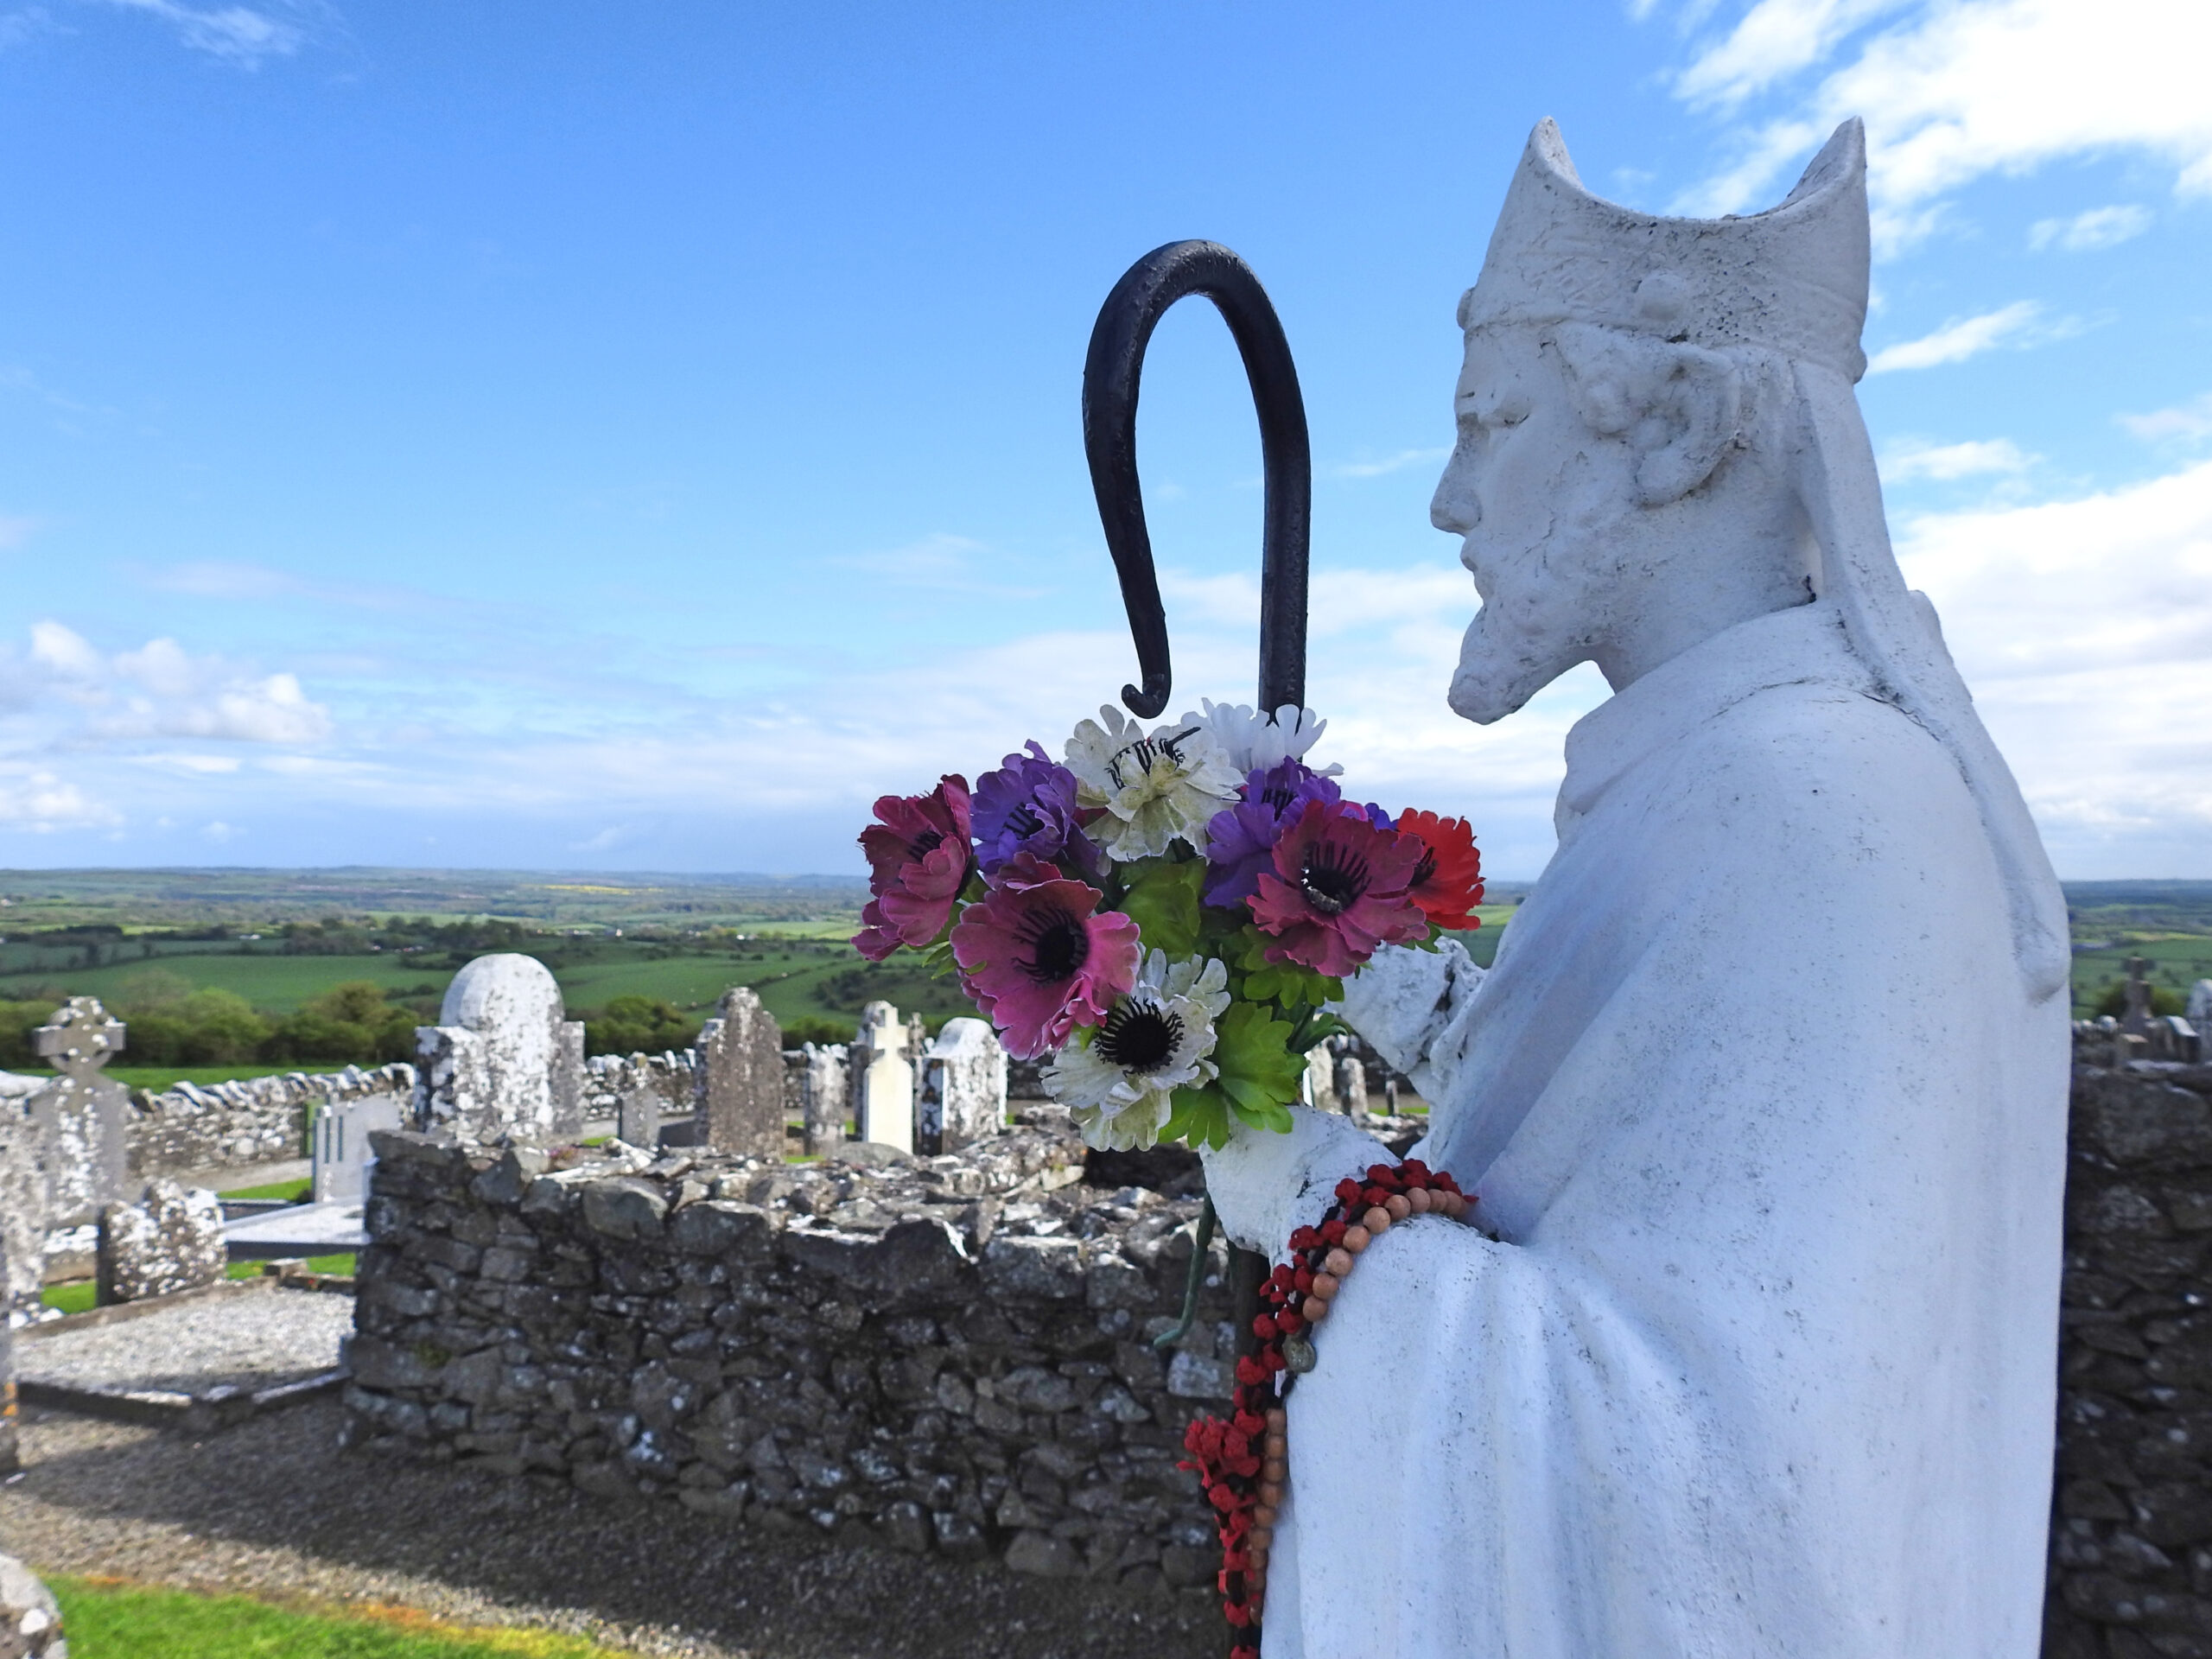 The Story Of Saint Patrick: How A Former Slave Brought Christianity To Ireland